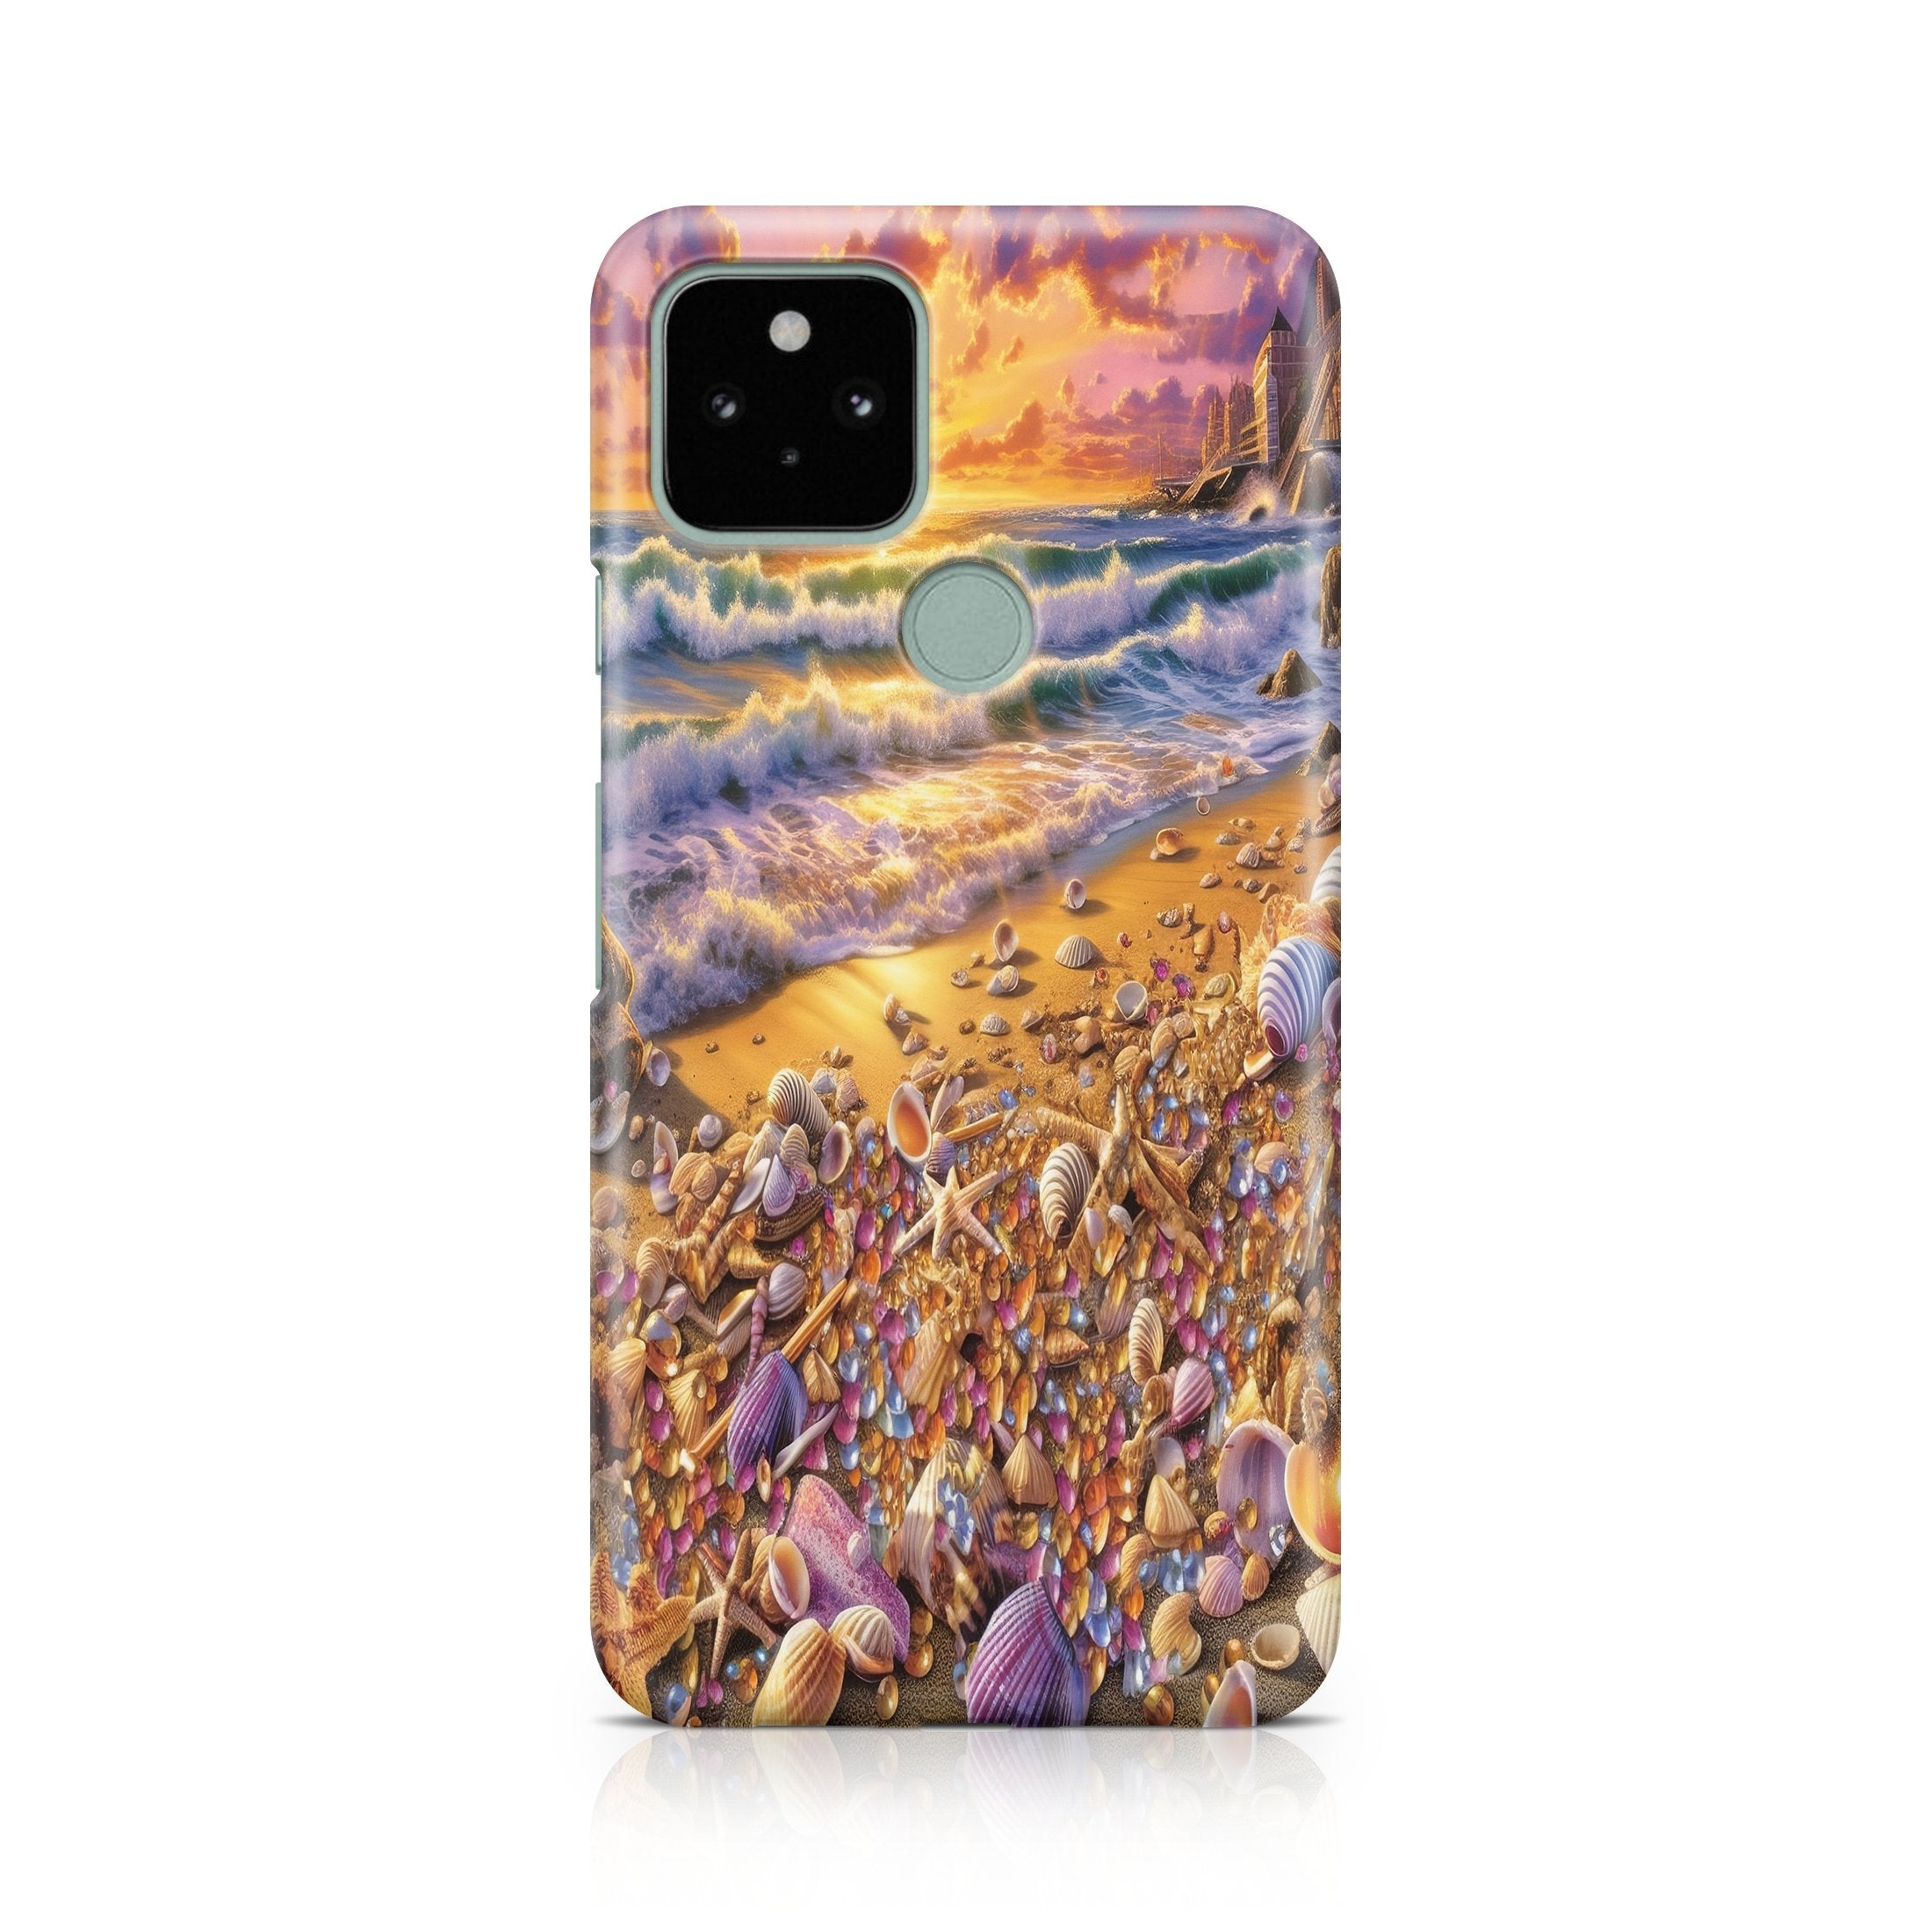 Beachside Treasure - Google phone case designs by CaseSwagger